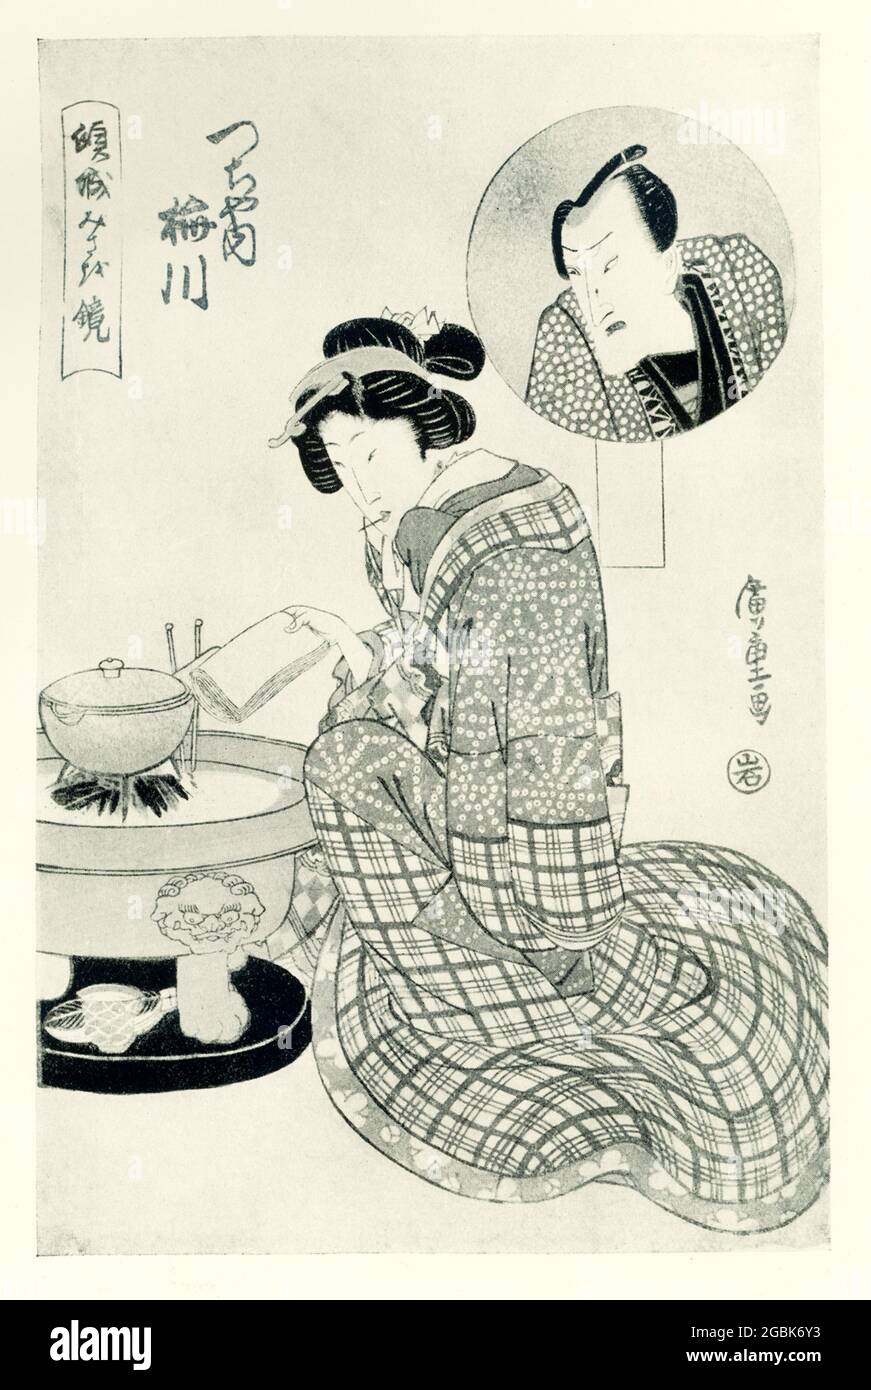 The 1920 caption reads: Umegawa of Tsuchi-ya. The inset in circle is her lover as an actor. It is one of a series 'A Mirror of faithful courtesans' that was signed by Hiroshige. The publisher is Iwato-ya.  Umegawa of Tsuchi-ya was a courtesan .Utagawa Hiroshige, born Andō Hiroshige, was a Japanese ukiyo-e artist, considered the last great master of that tradition. Stock Photo